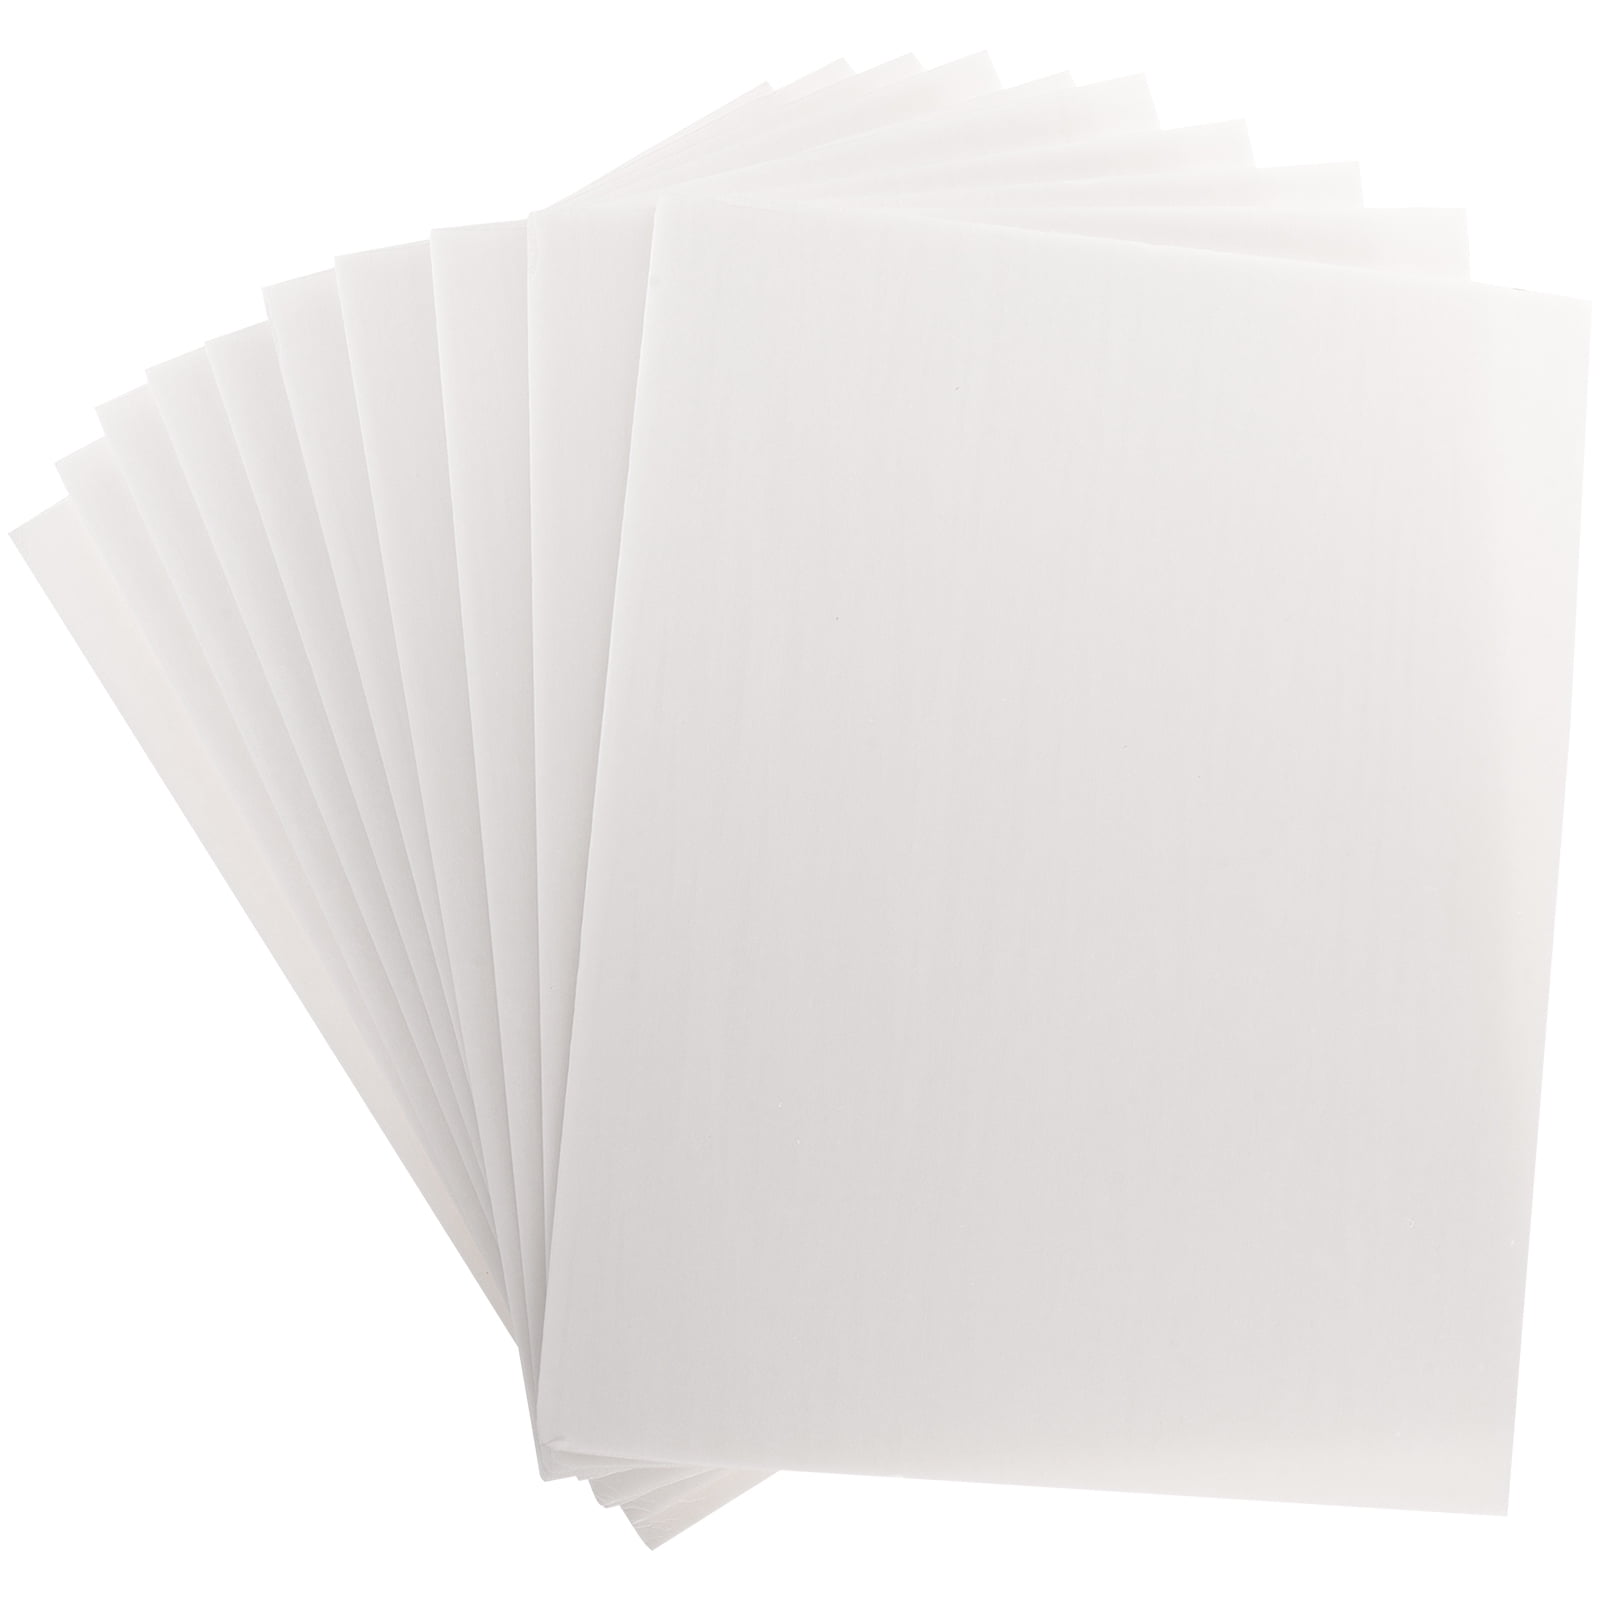 Cholemy 120 Pcs Foam Printing Plates White Foam Sheets 1/20 Inch Thick Foam  Board Foam Papers Set for Card Making, Crafting, Printing, DIY Project